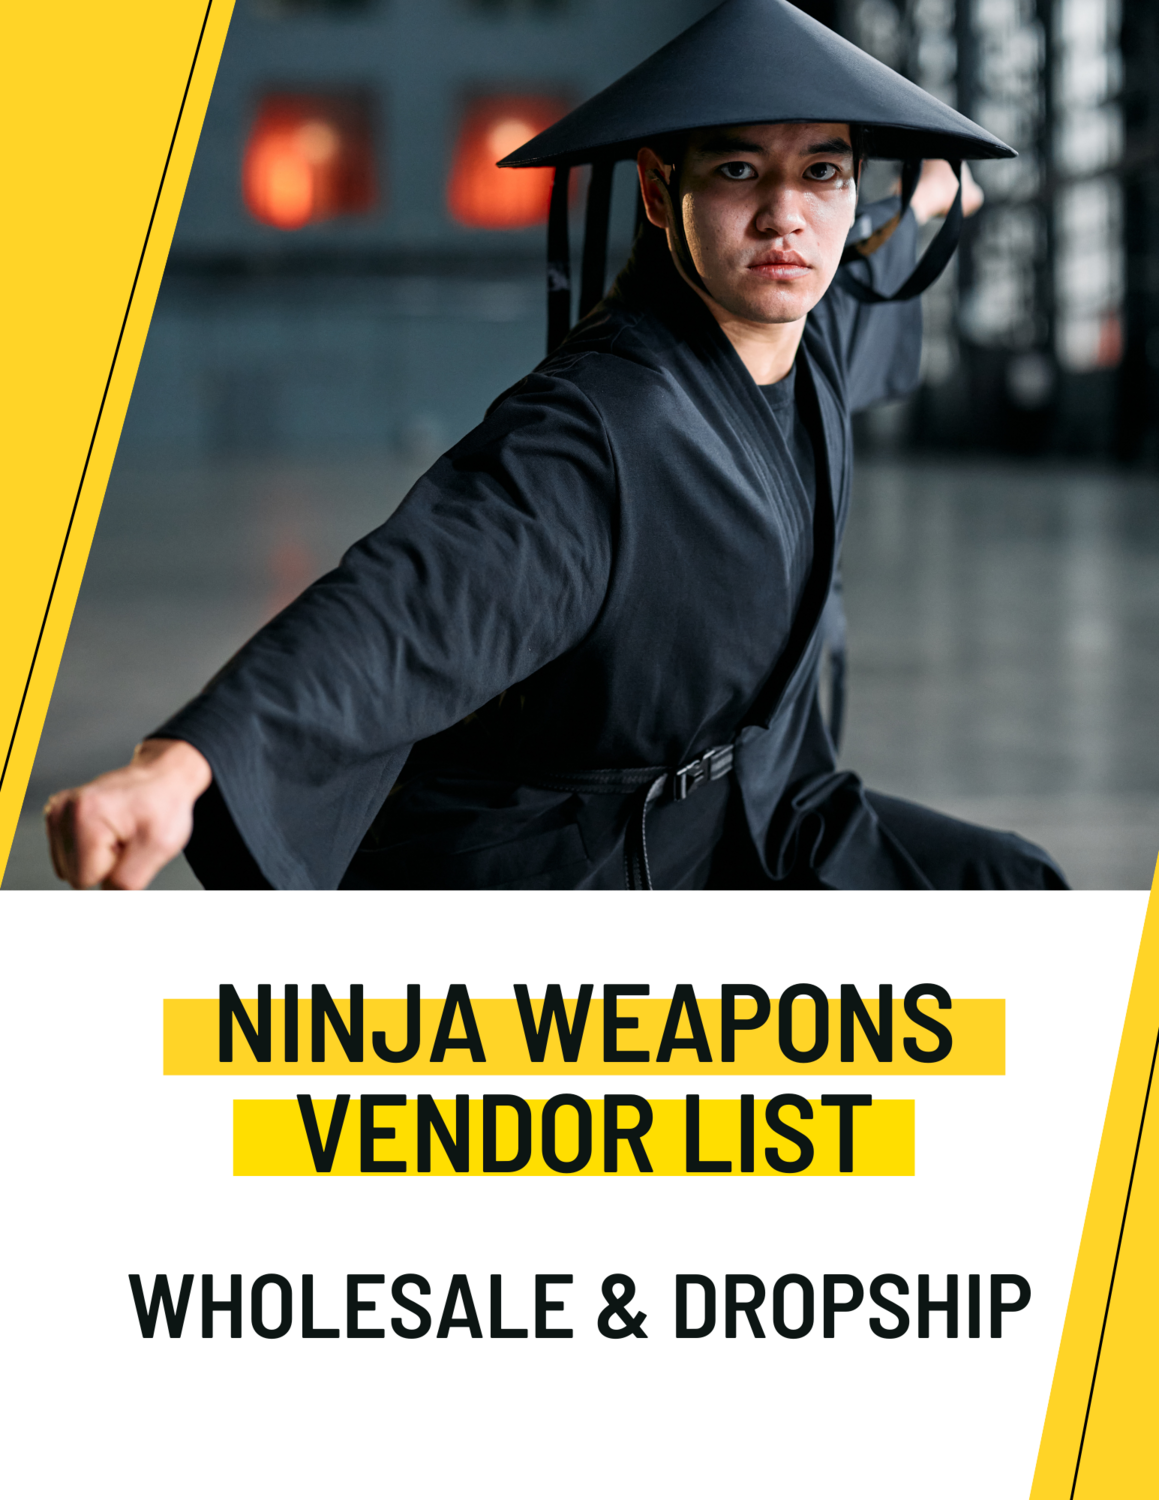 Wholesale Ninja Weapons Suppliers and Drop ship Ninja Weapons Vendor List - Martial Arts Products